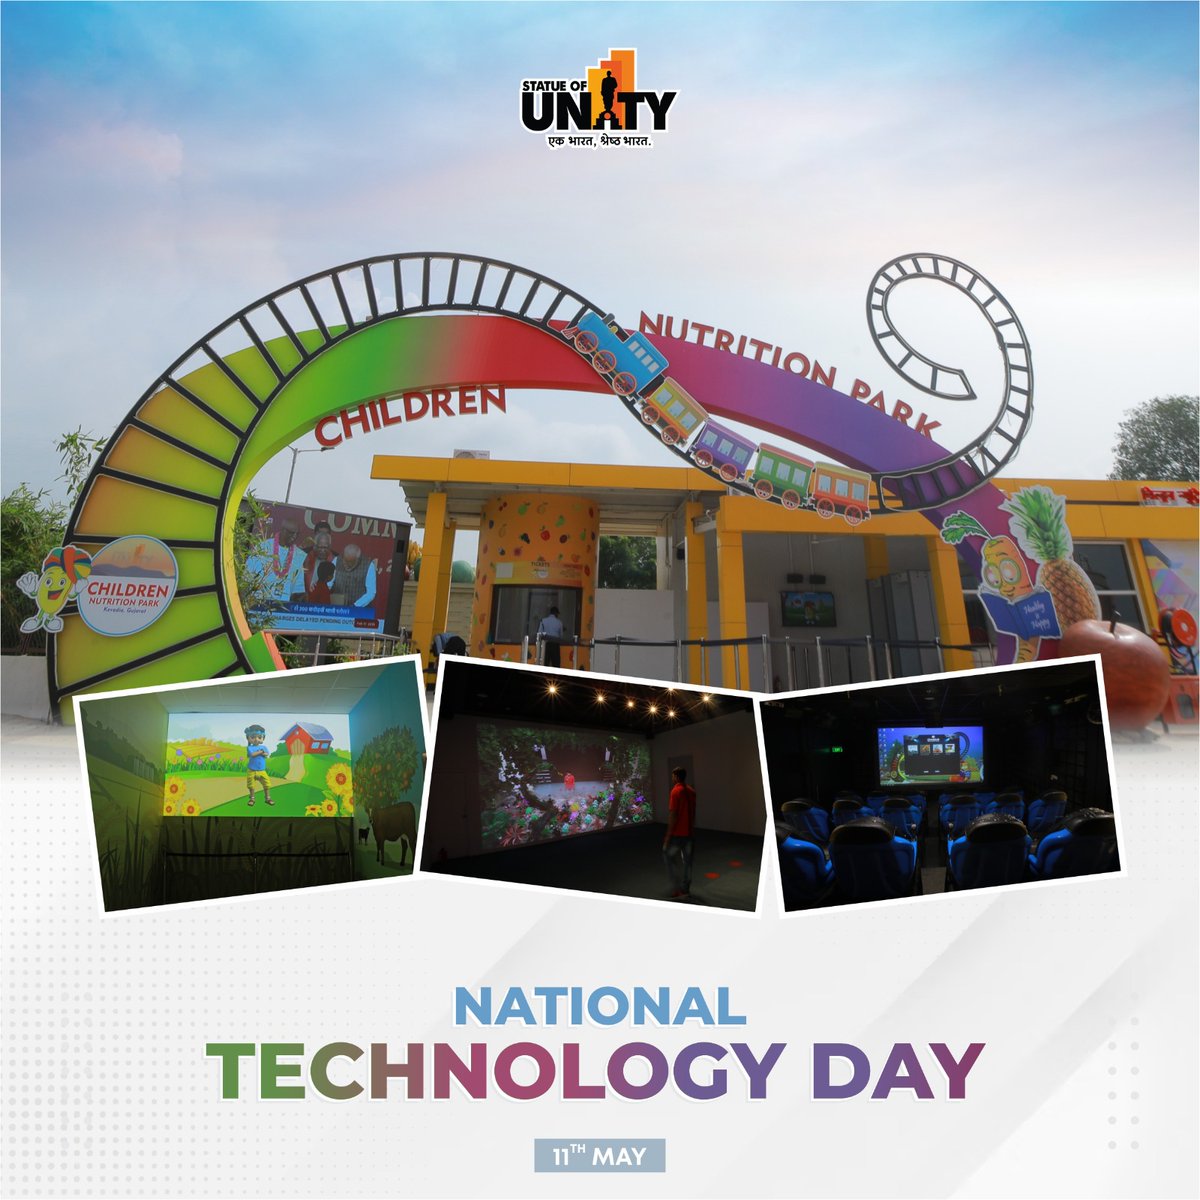 Celebrate #NationalTechonologyDay with #StatueOfUnity’s technology driven #ChildrenNutritionPark !!

Let us applaud the incredible innovations that drive progress and fuel our journey towards a brighter future.

#InnovationNation #EktaNagar #StatueOfUnity #ExploreGujarat…